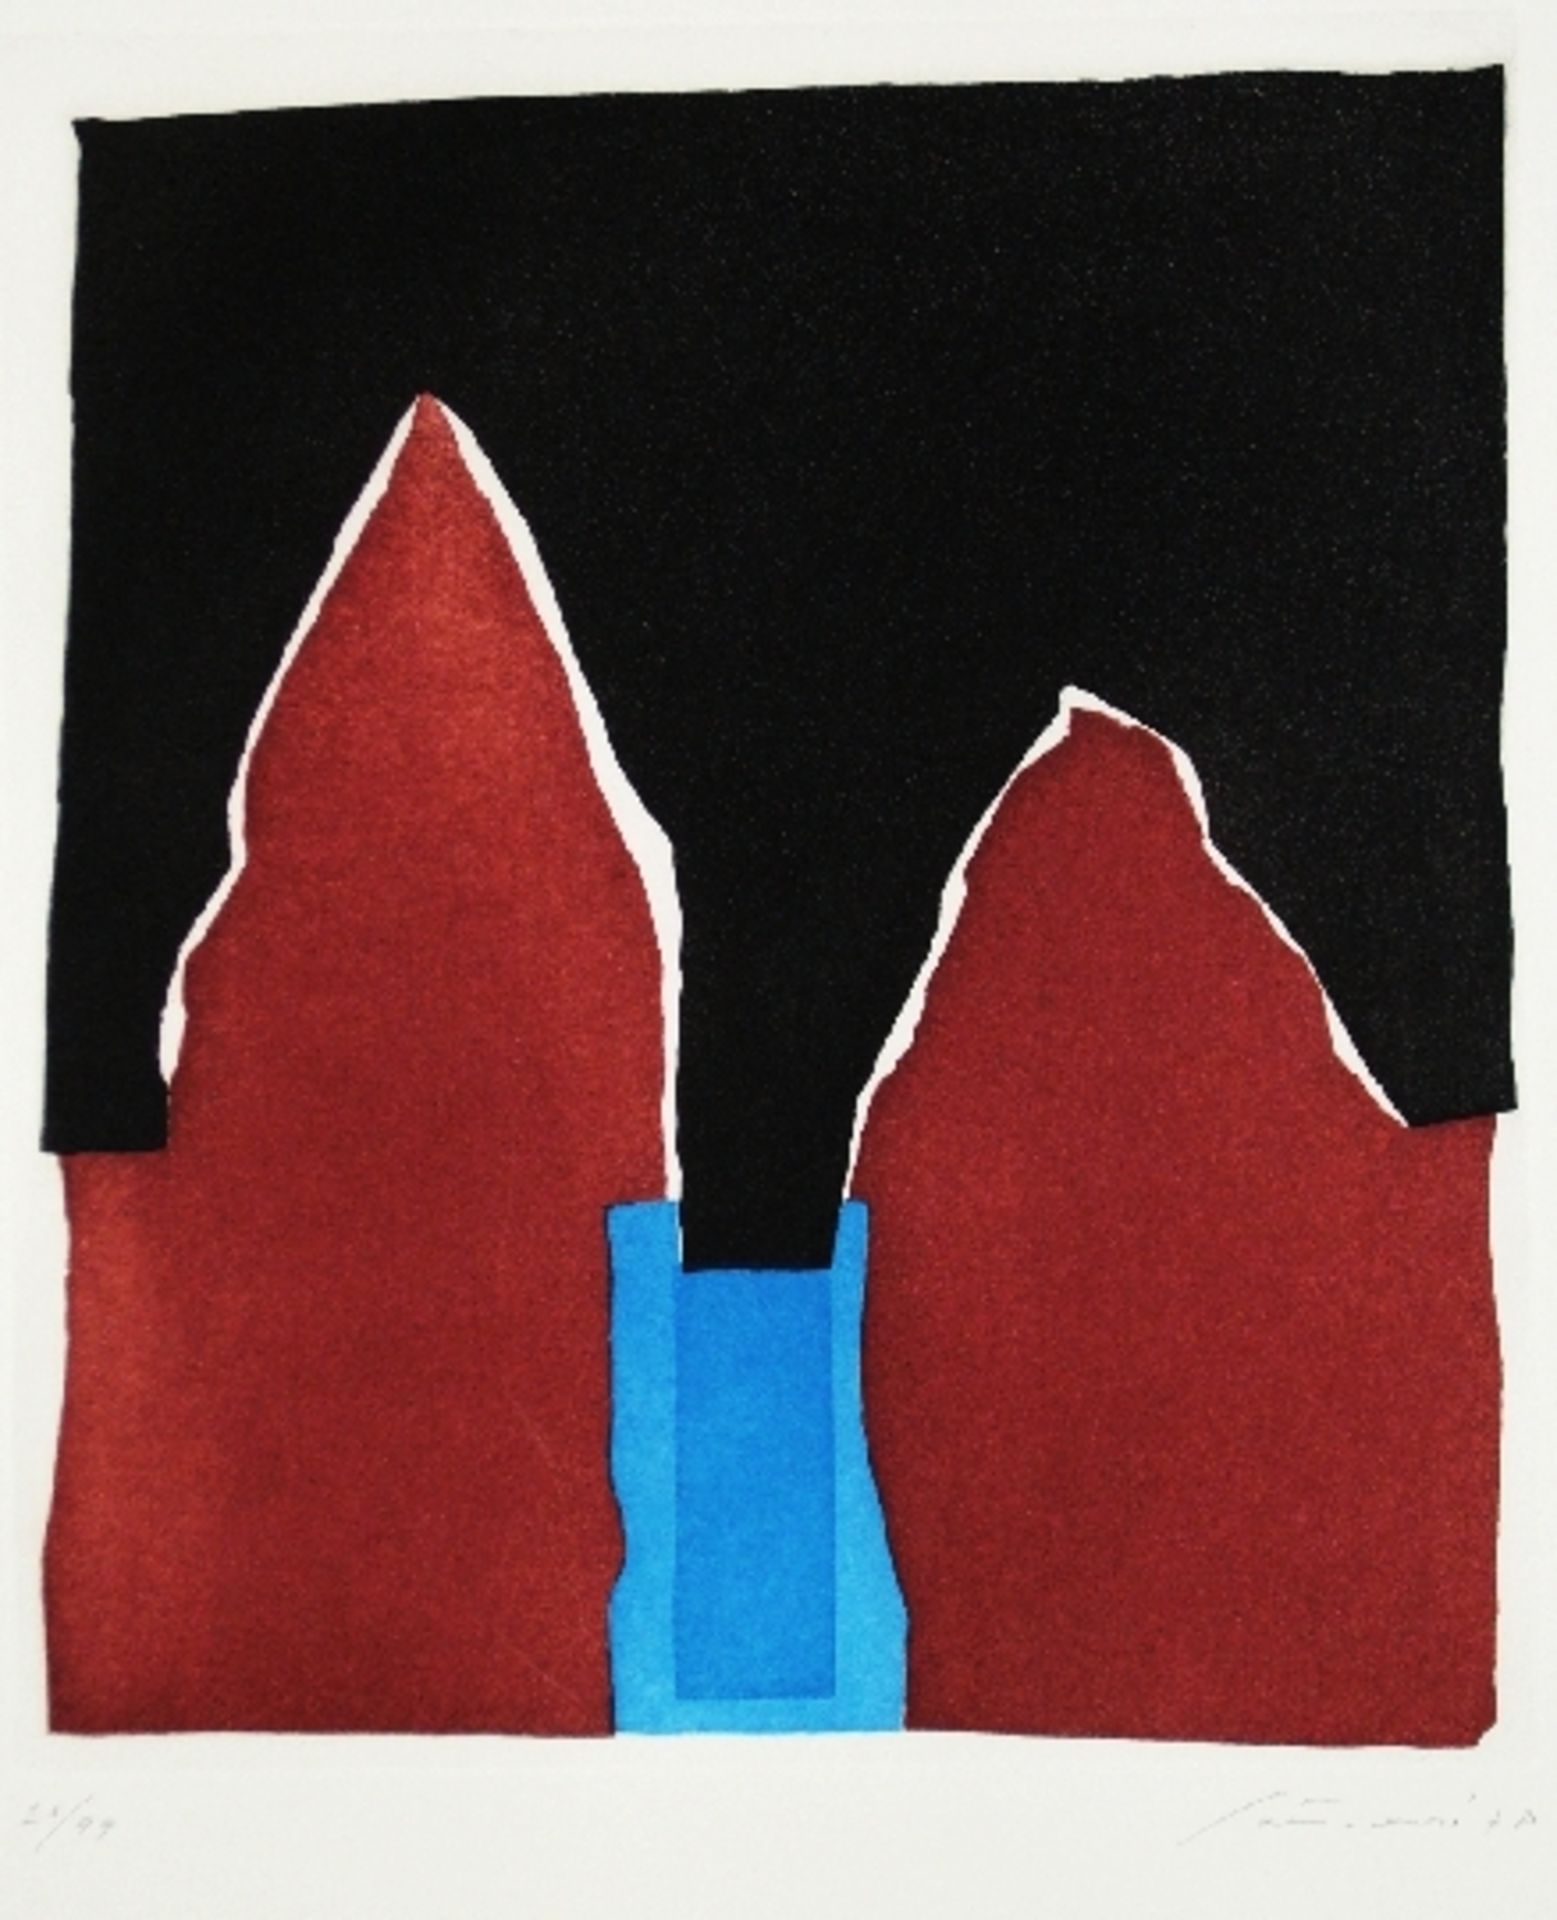 Giuseppe SANTOMASO Untitled 3, 1978 Etching and aquatint on Guarro paper Edition of [...]